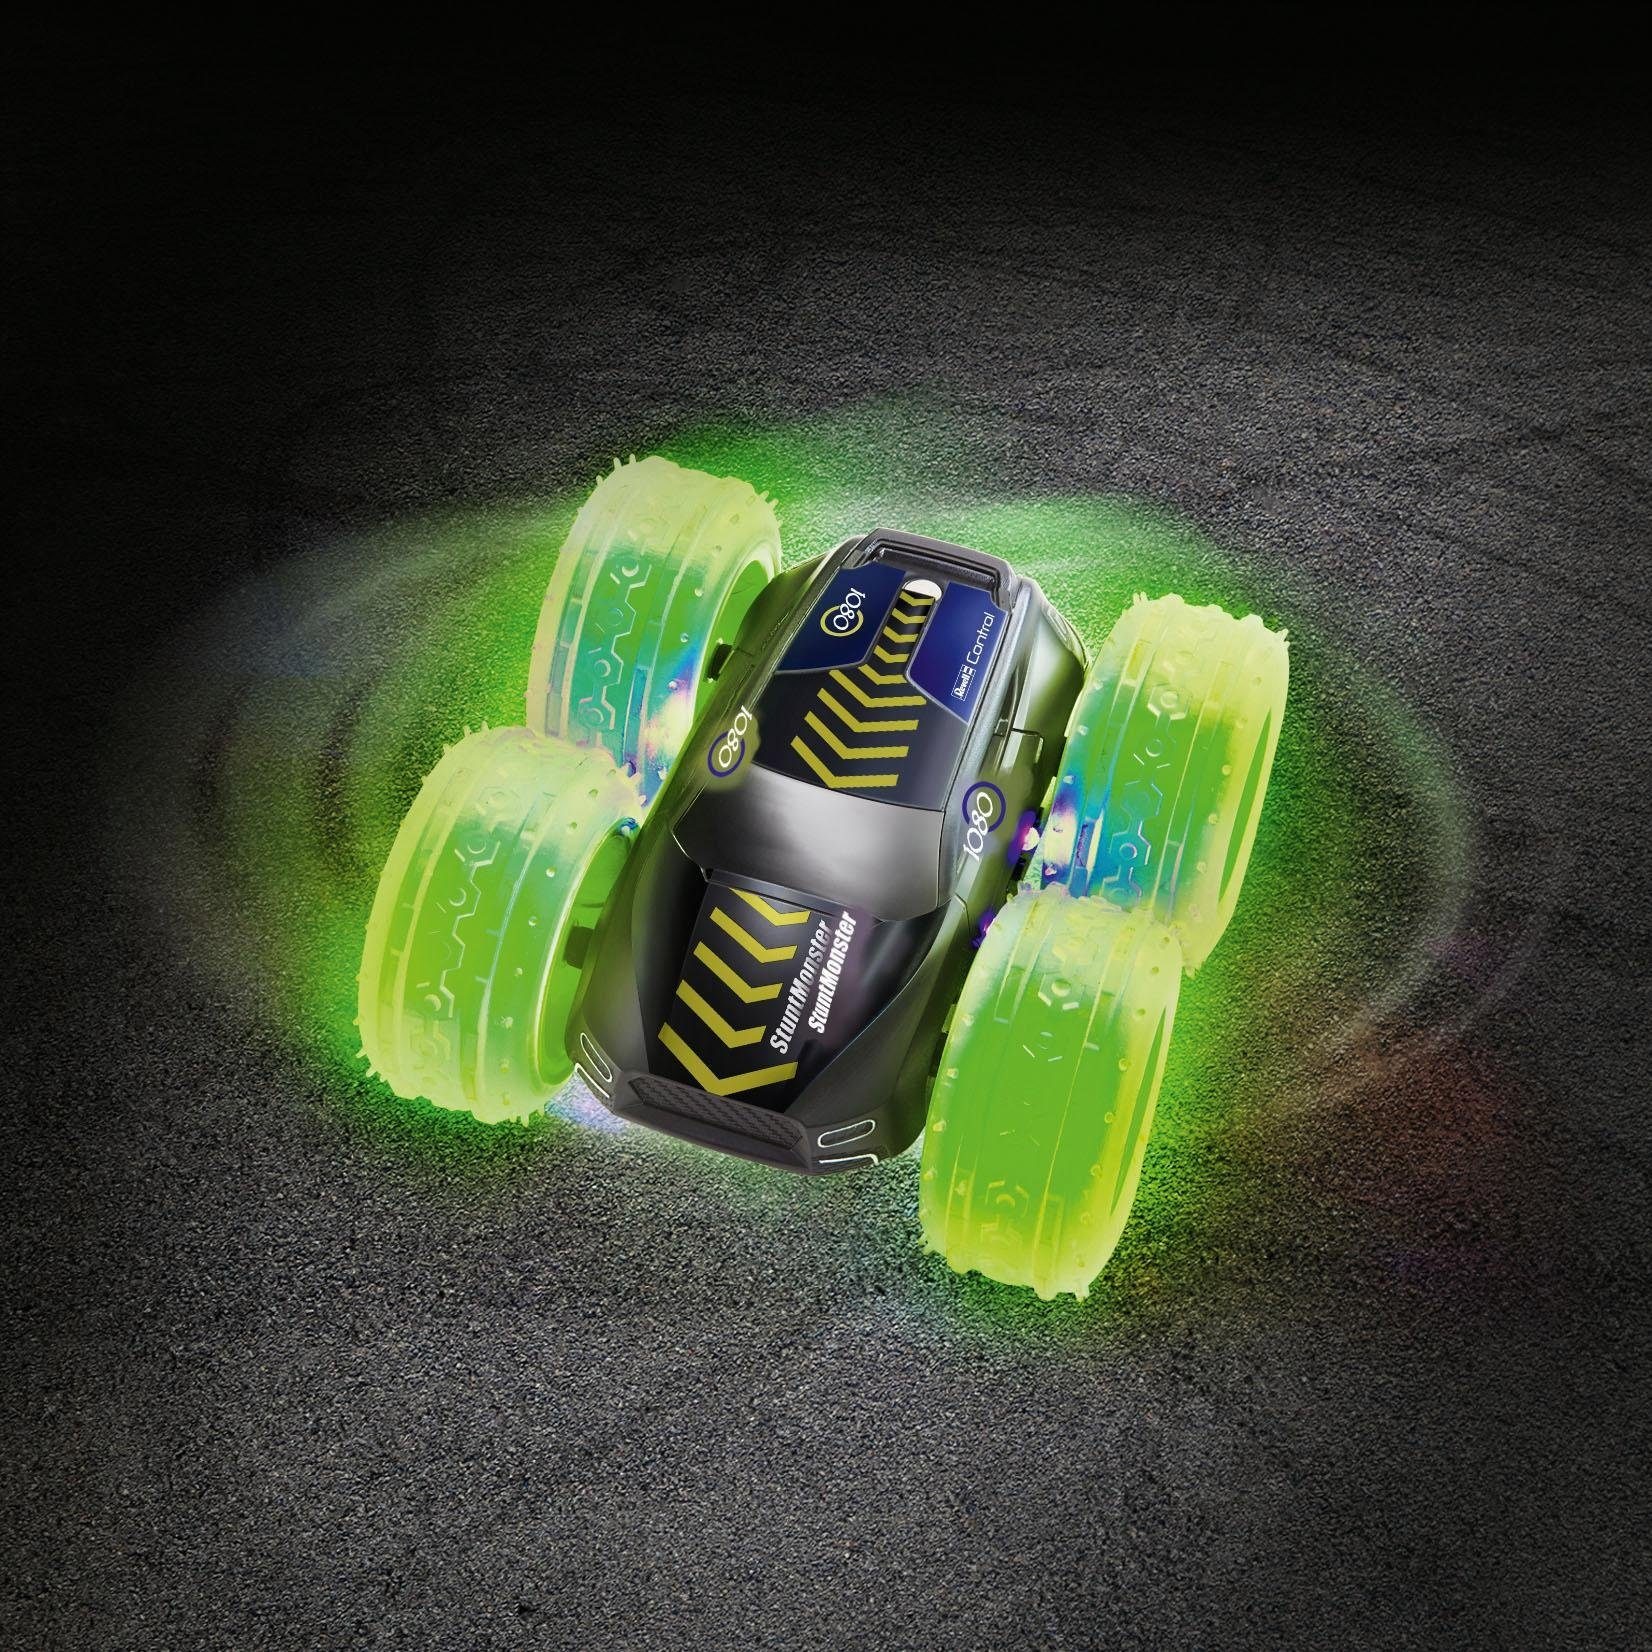 Revell® RC-Auto »Revell® control, Stunt Monster Mini«, mit LED-Beleuchtung